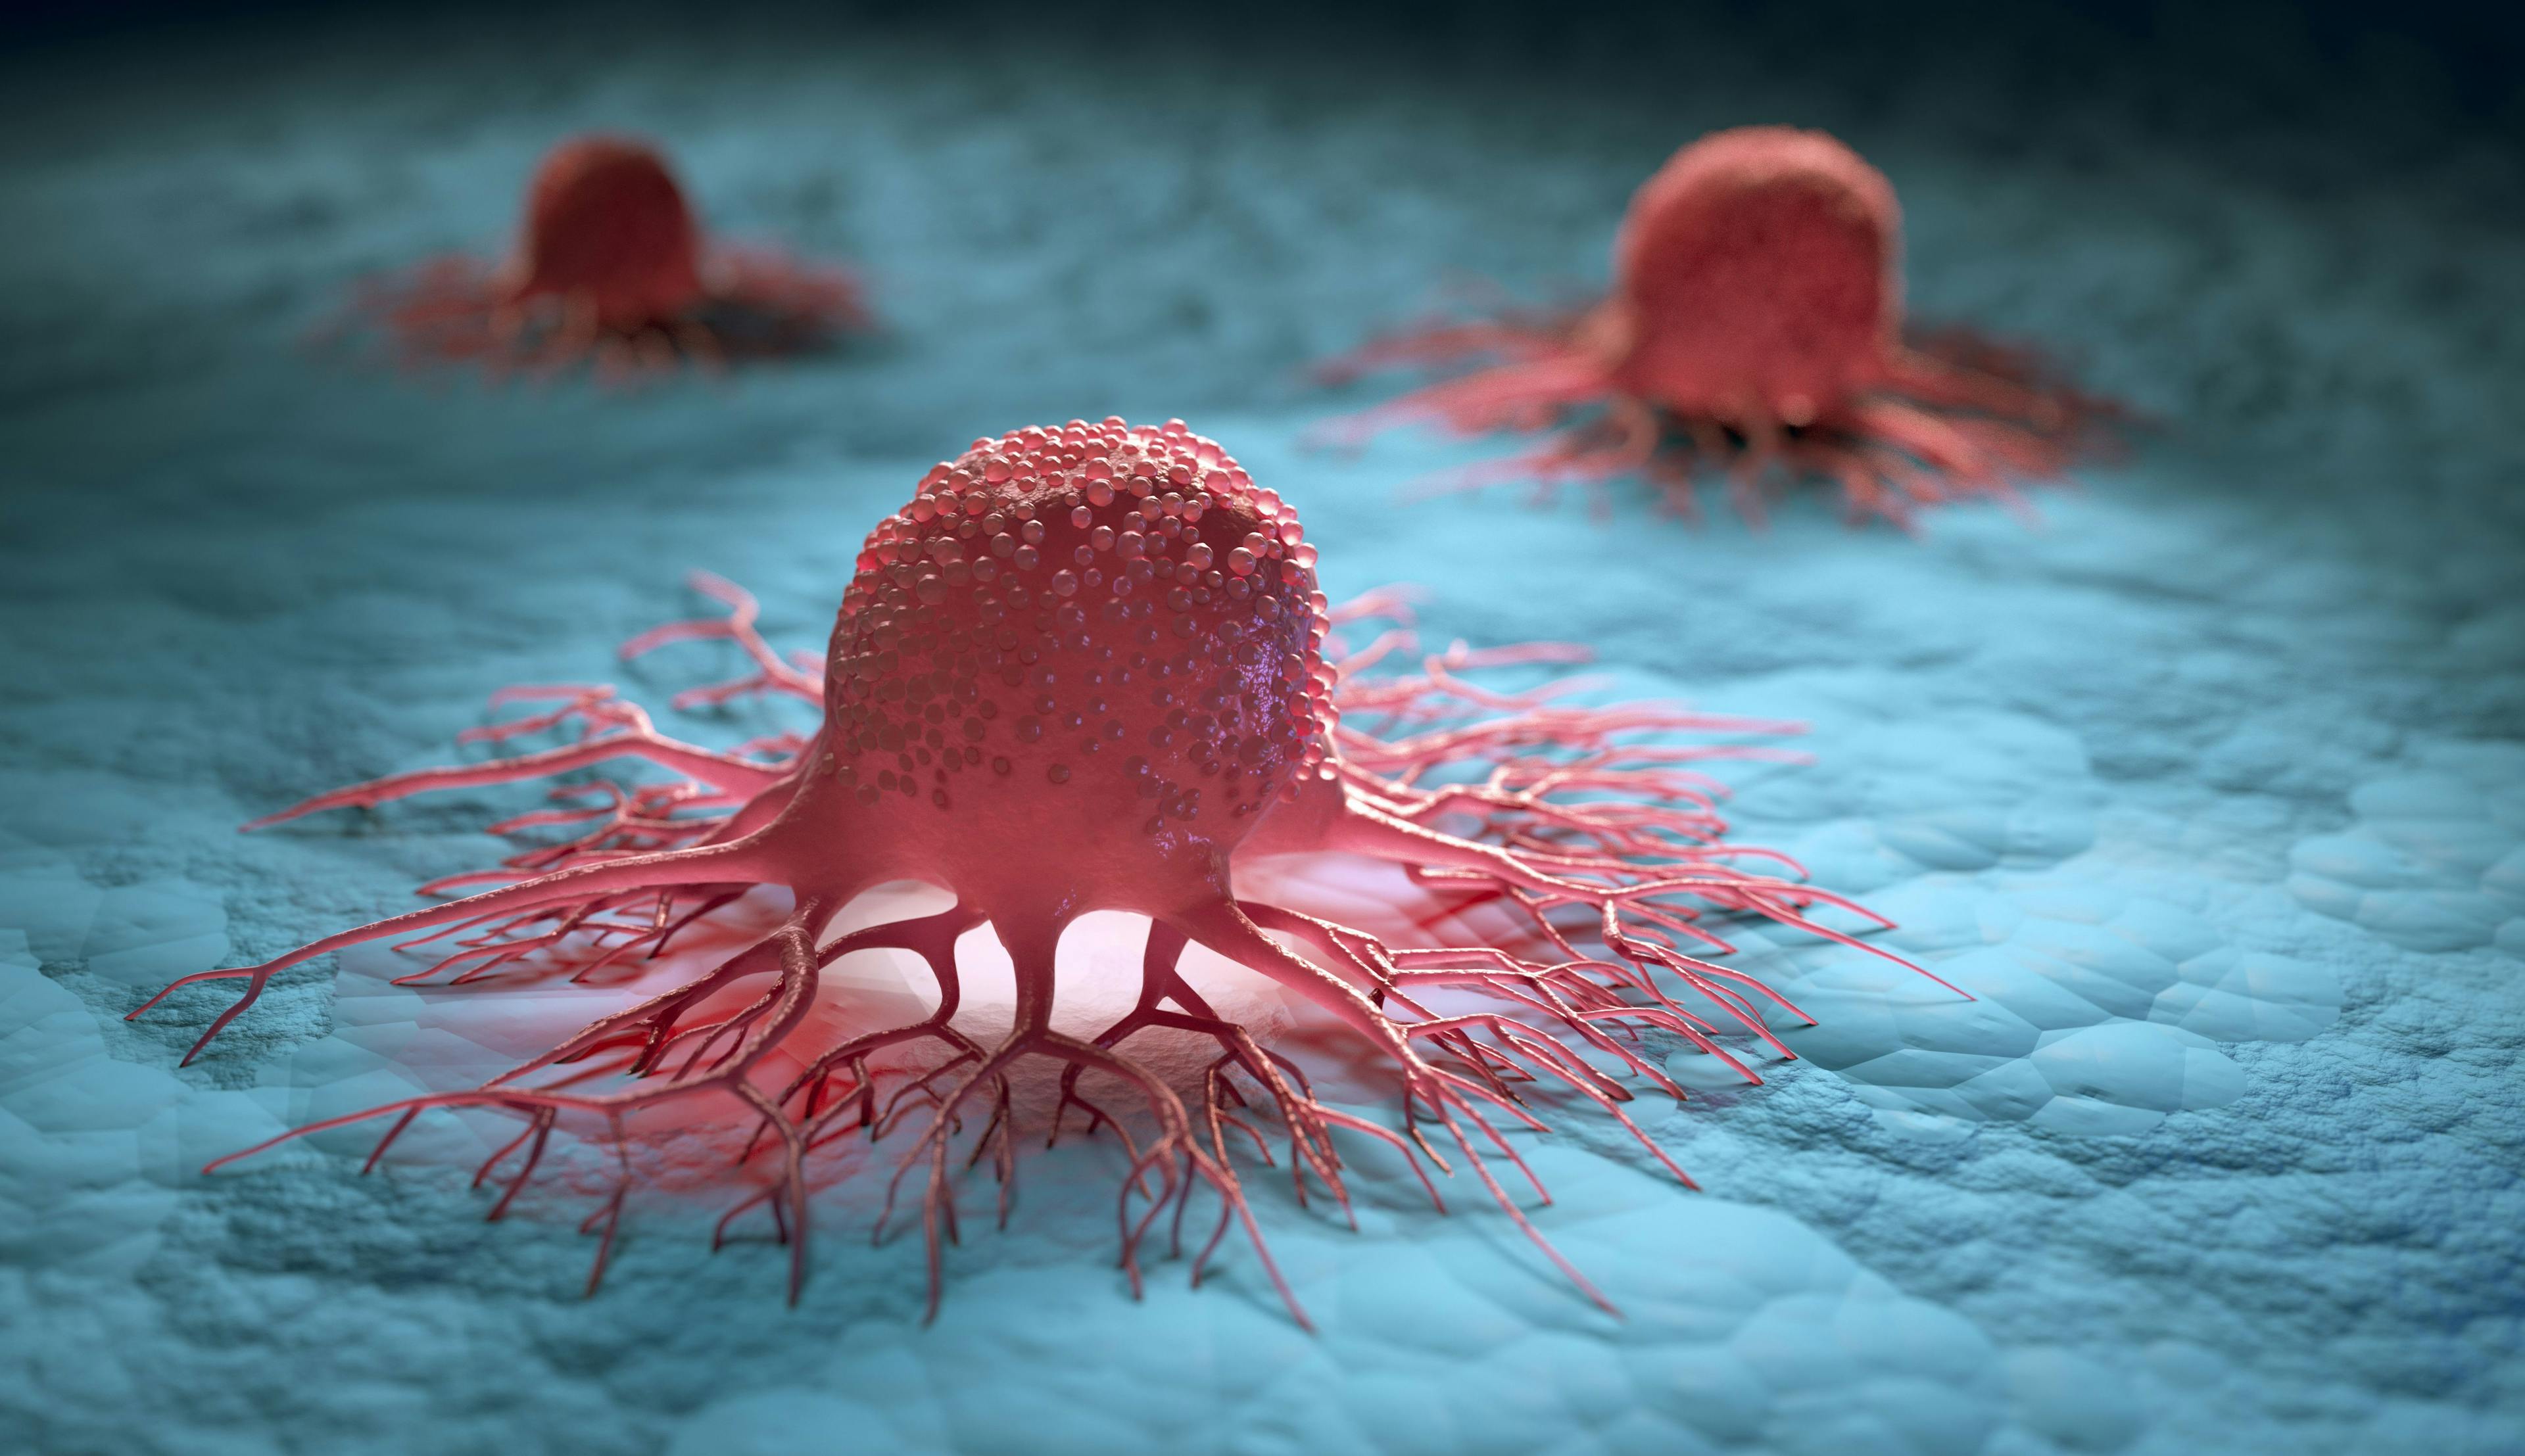 Advanced Solid Tumor CAR-T Therapy Trial Doses First Patient